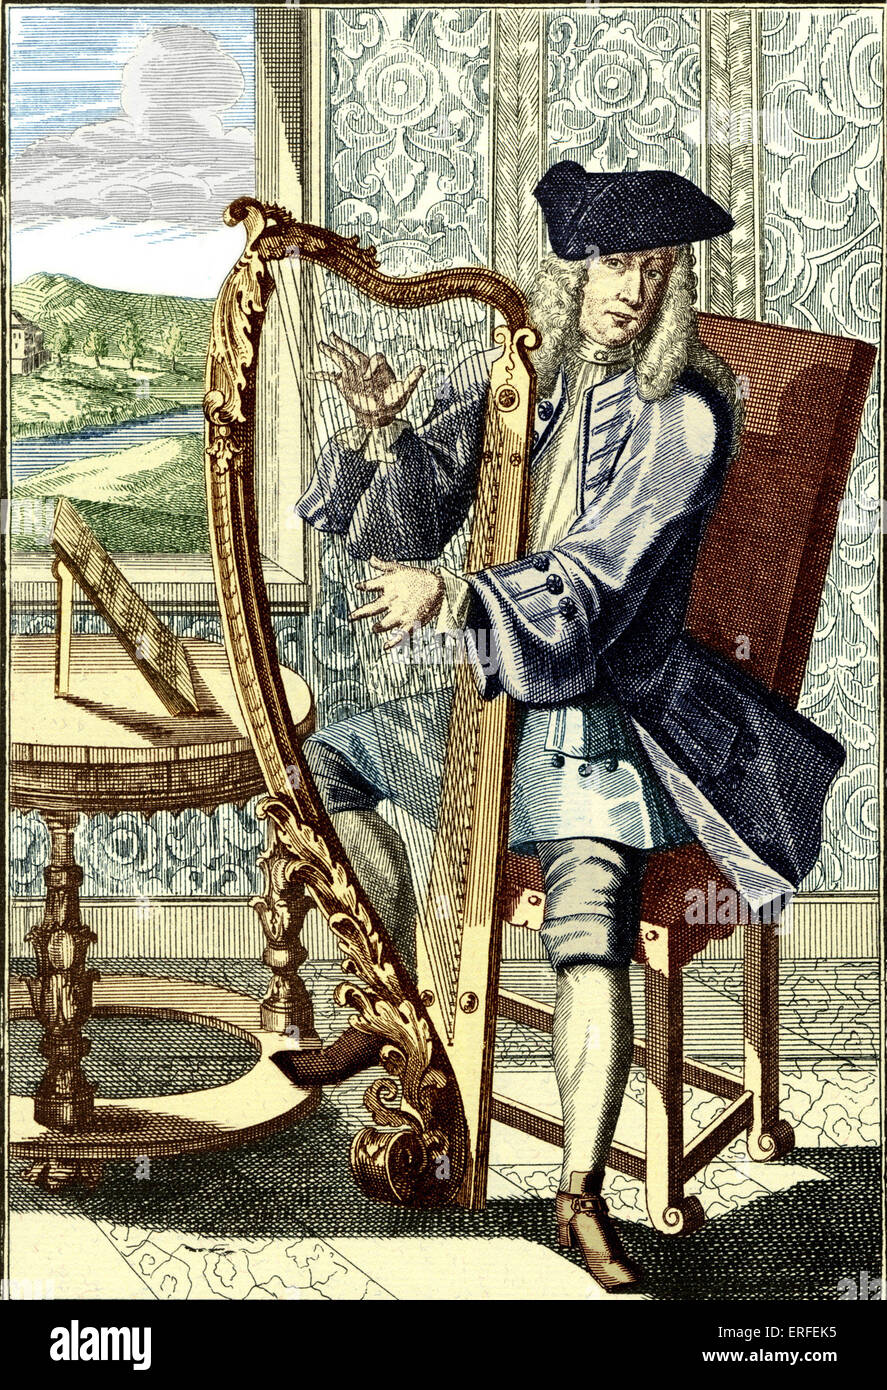 Man playing Harp from 'Musicalisches Theatrum'. Engraving by J C Weigel (1661-1726). Stock Photo